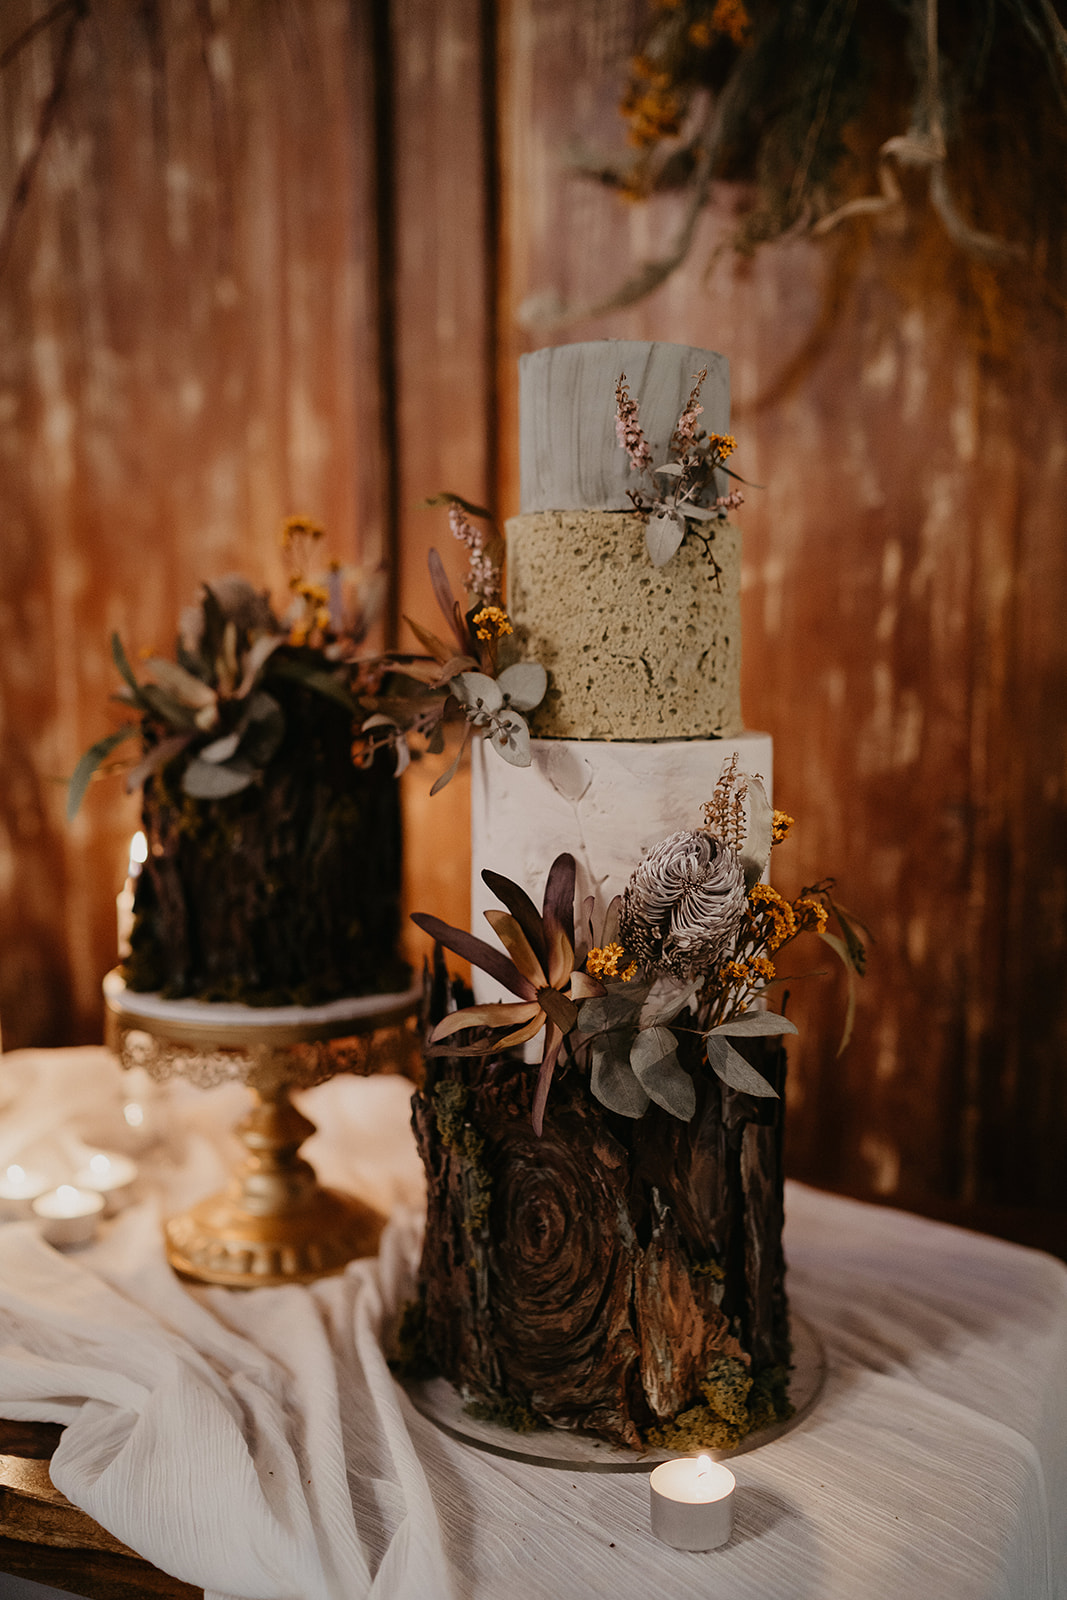 doe and deer photography castle and crown videography gold coast weddings cake venue bridal gown florals stationery